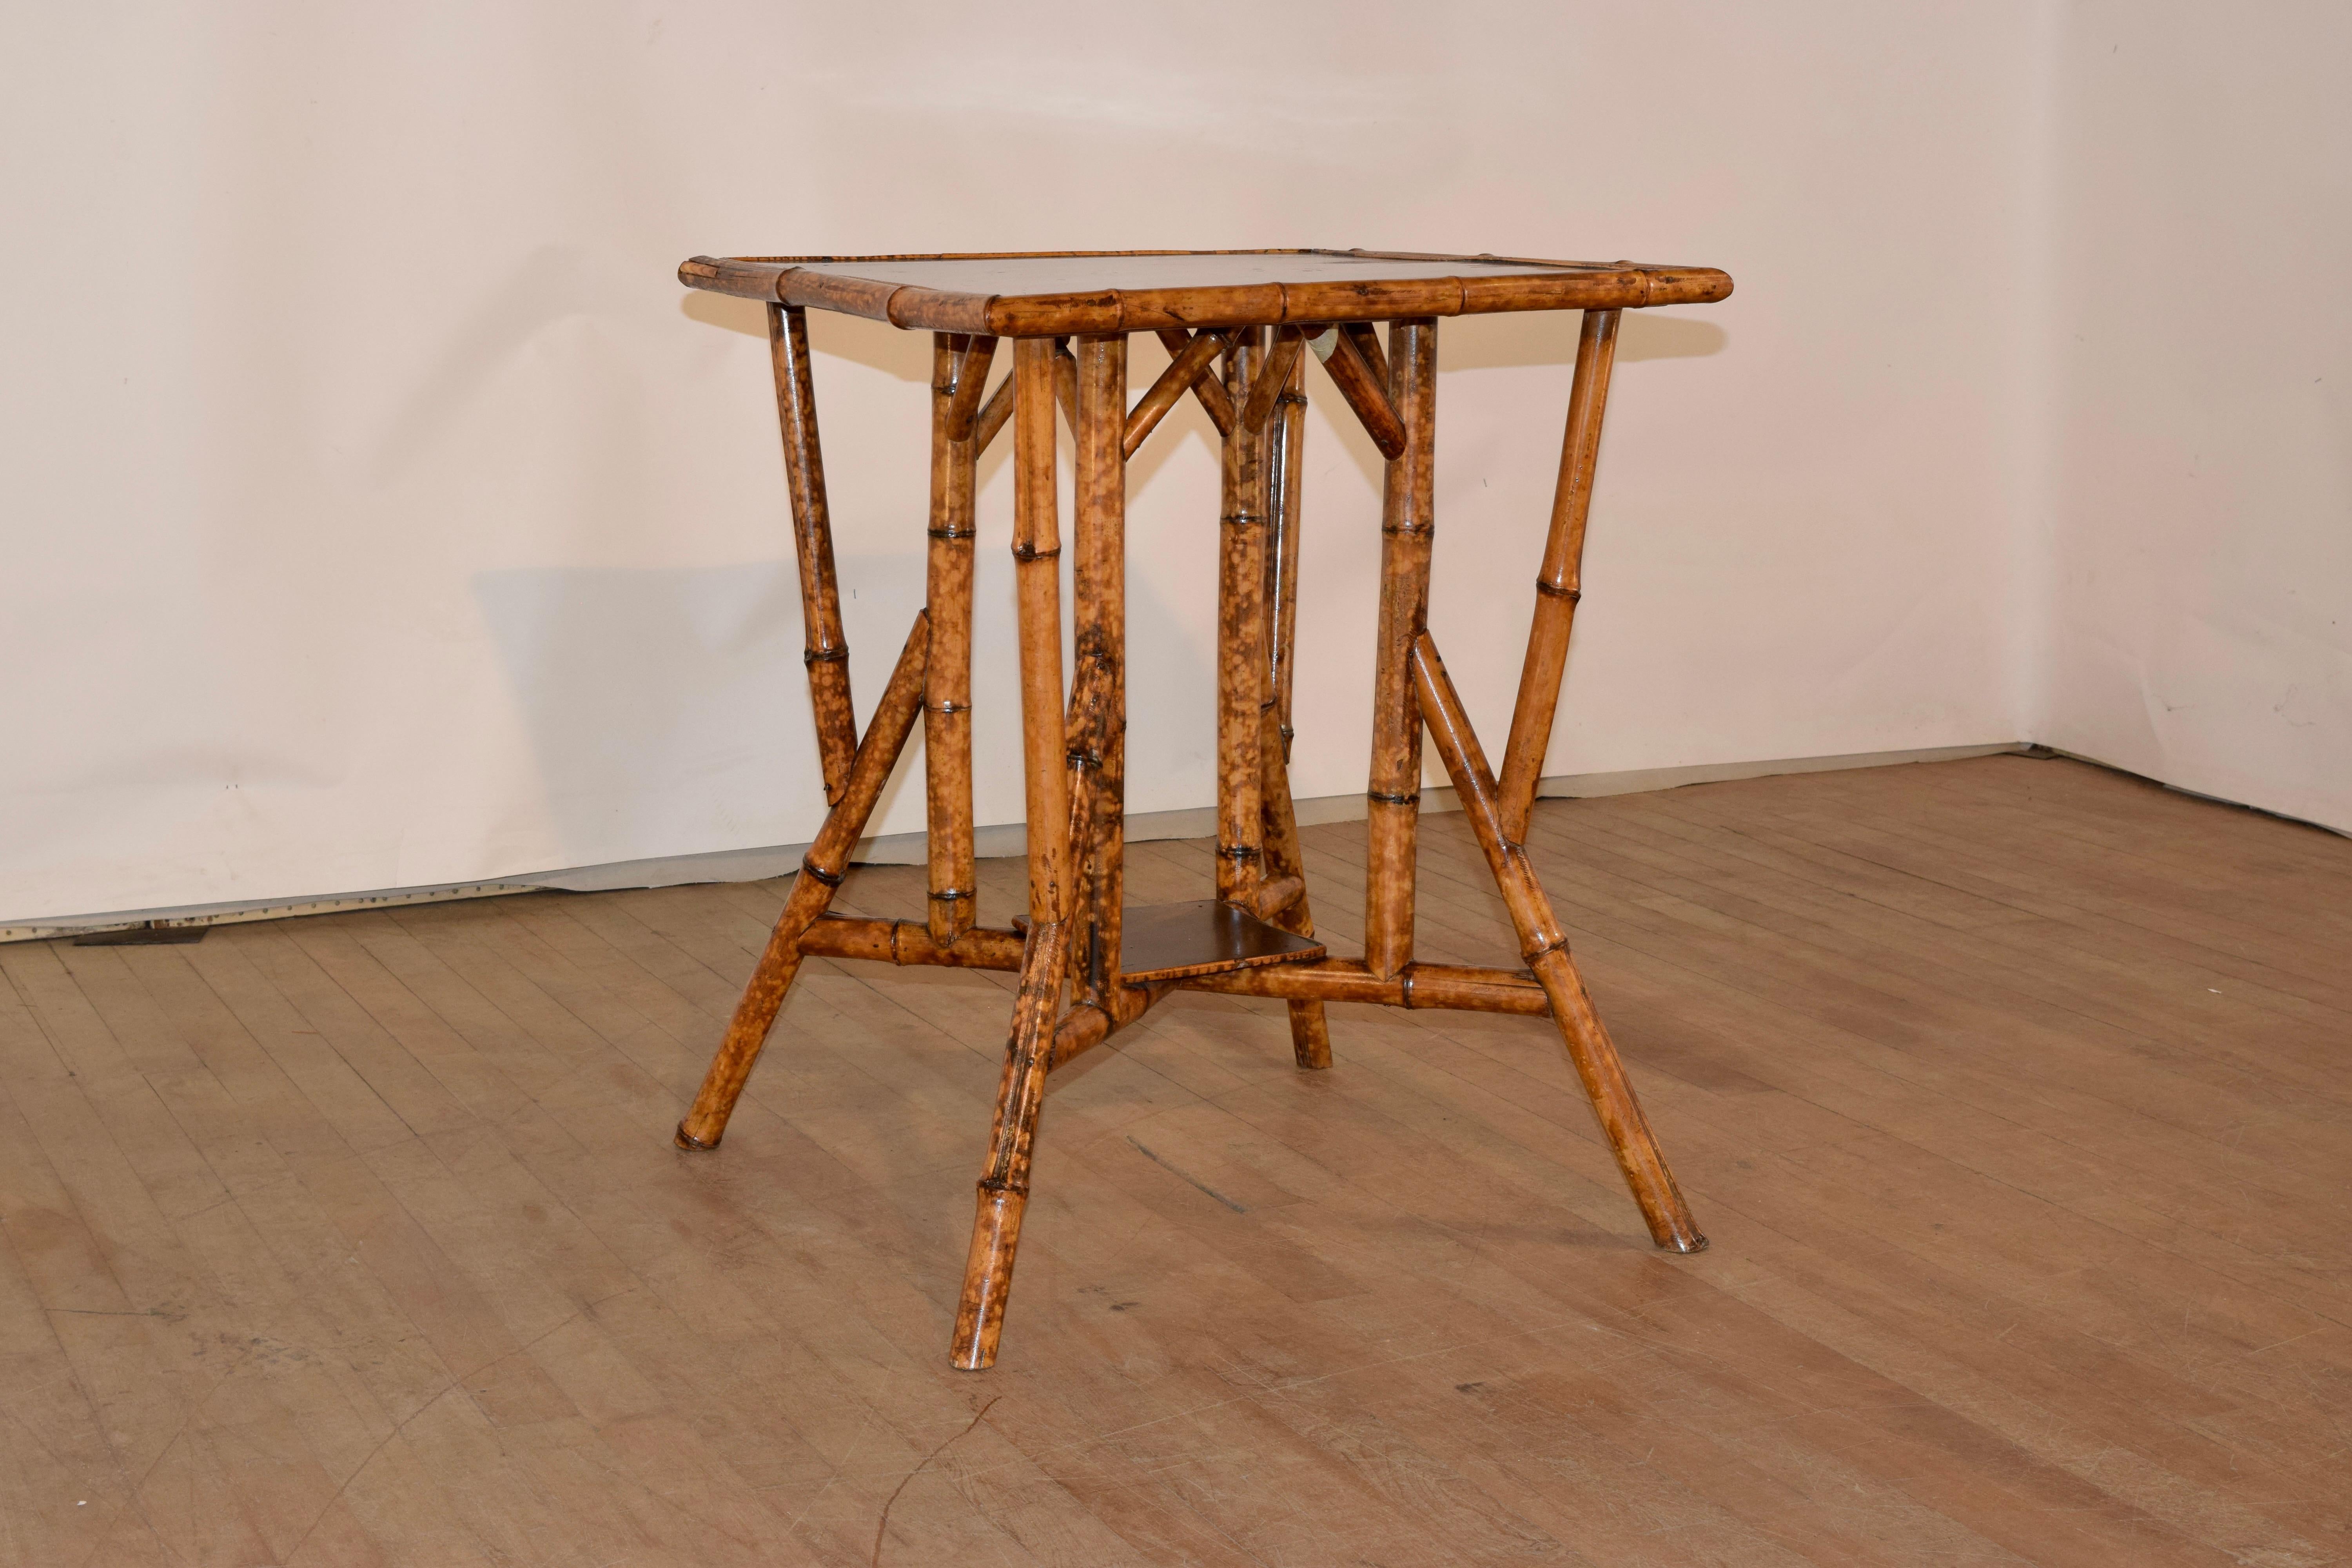 19th Century tortoise bamboo side table from France with a hand painted chinoiserie top and lower shelf. The frame is very interesting and unusual. It is made from tortoise bamboo and has splayed legs, joined by stretchers. This is a wonderful